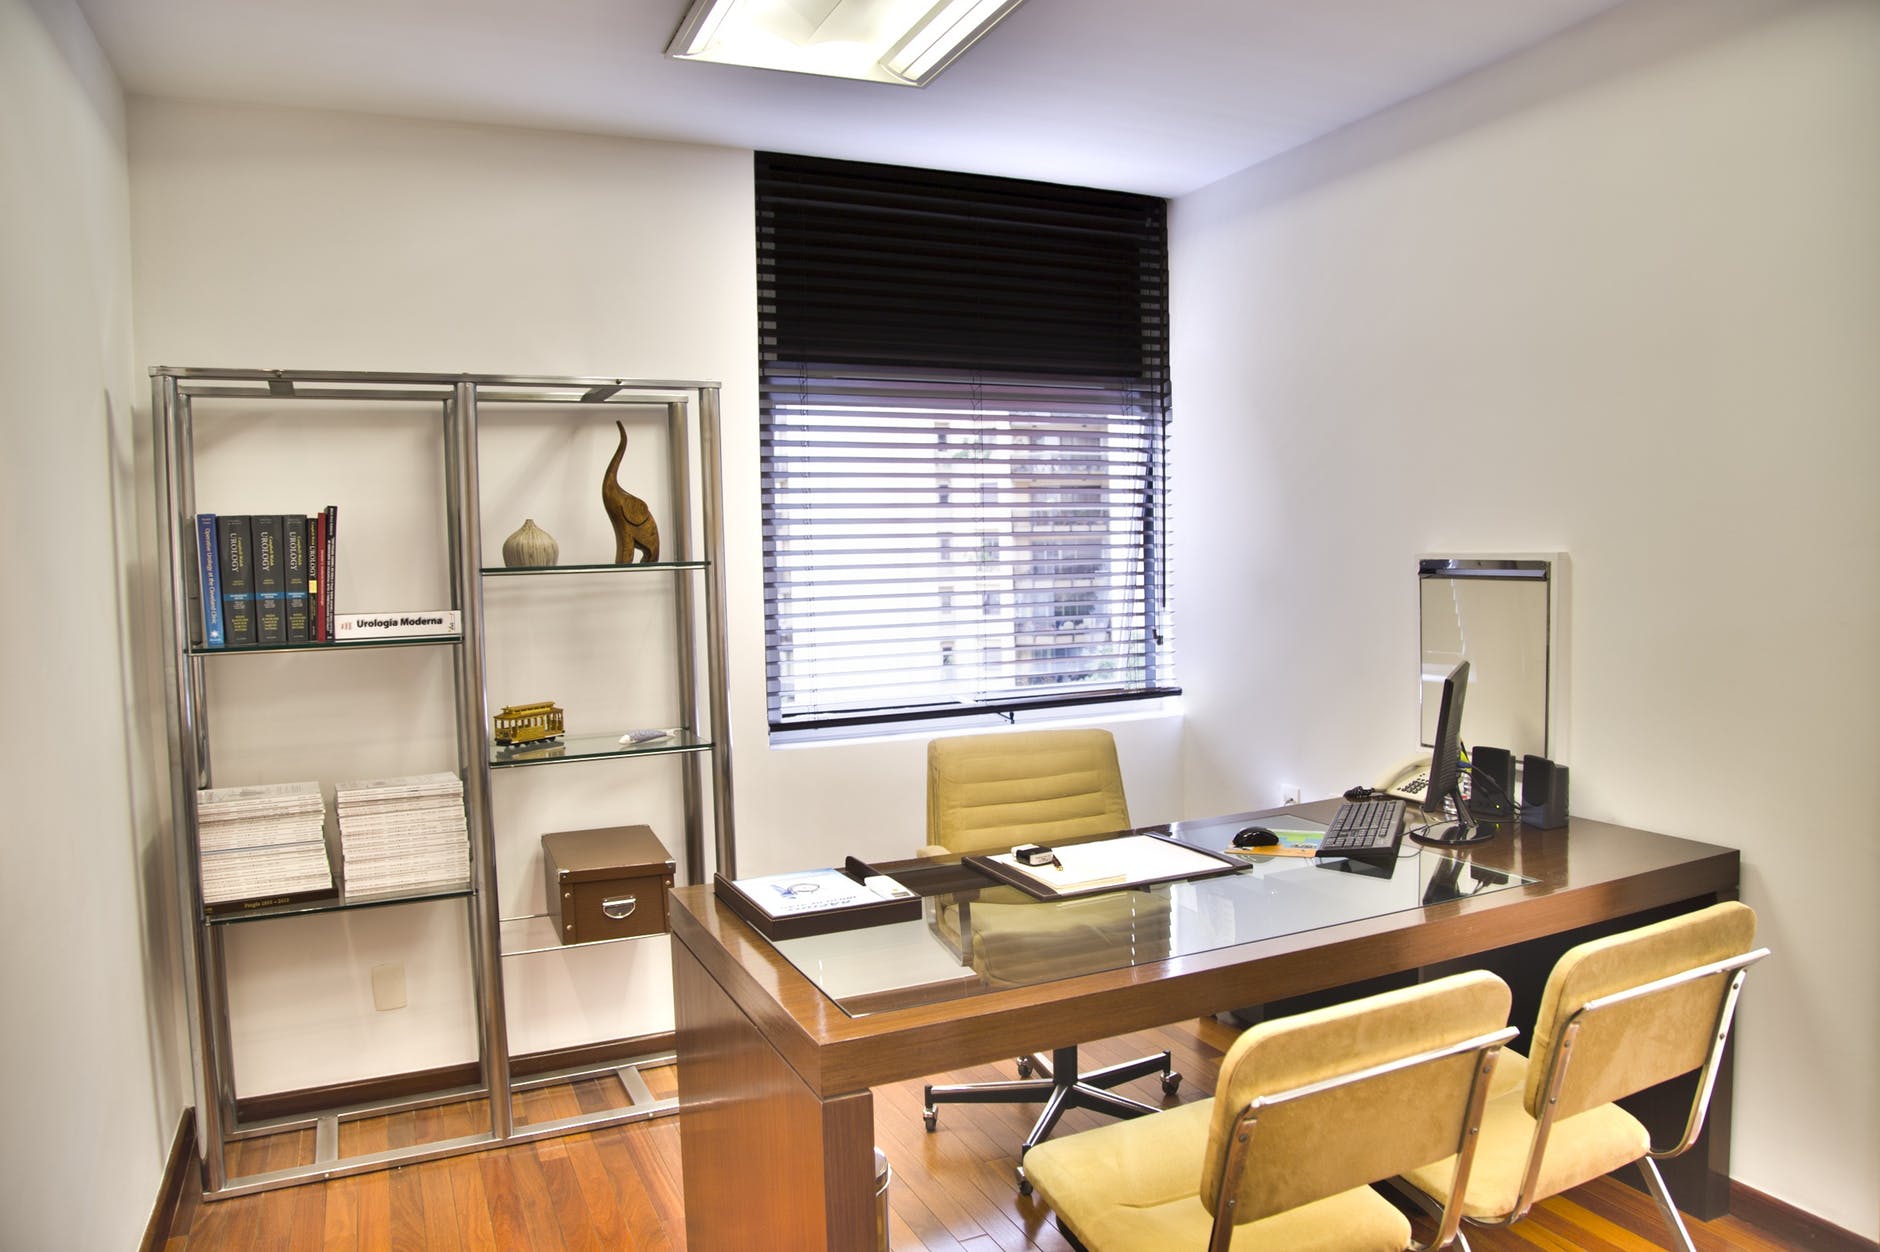 HOW TO SELECT THE RIGHT BLINDS FOR YOUR OFFICE